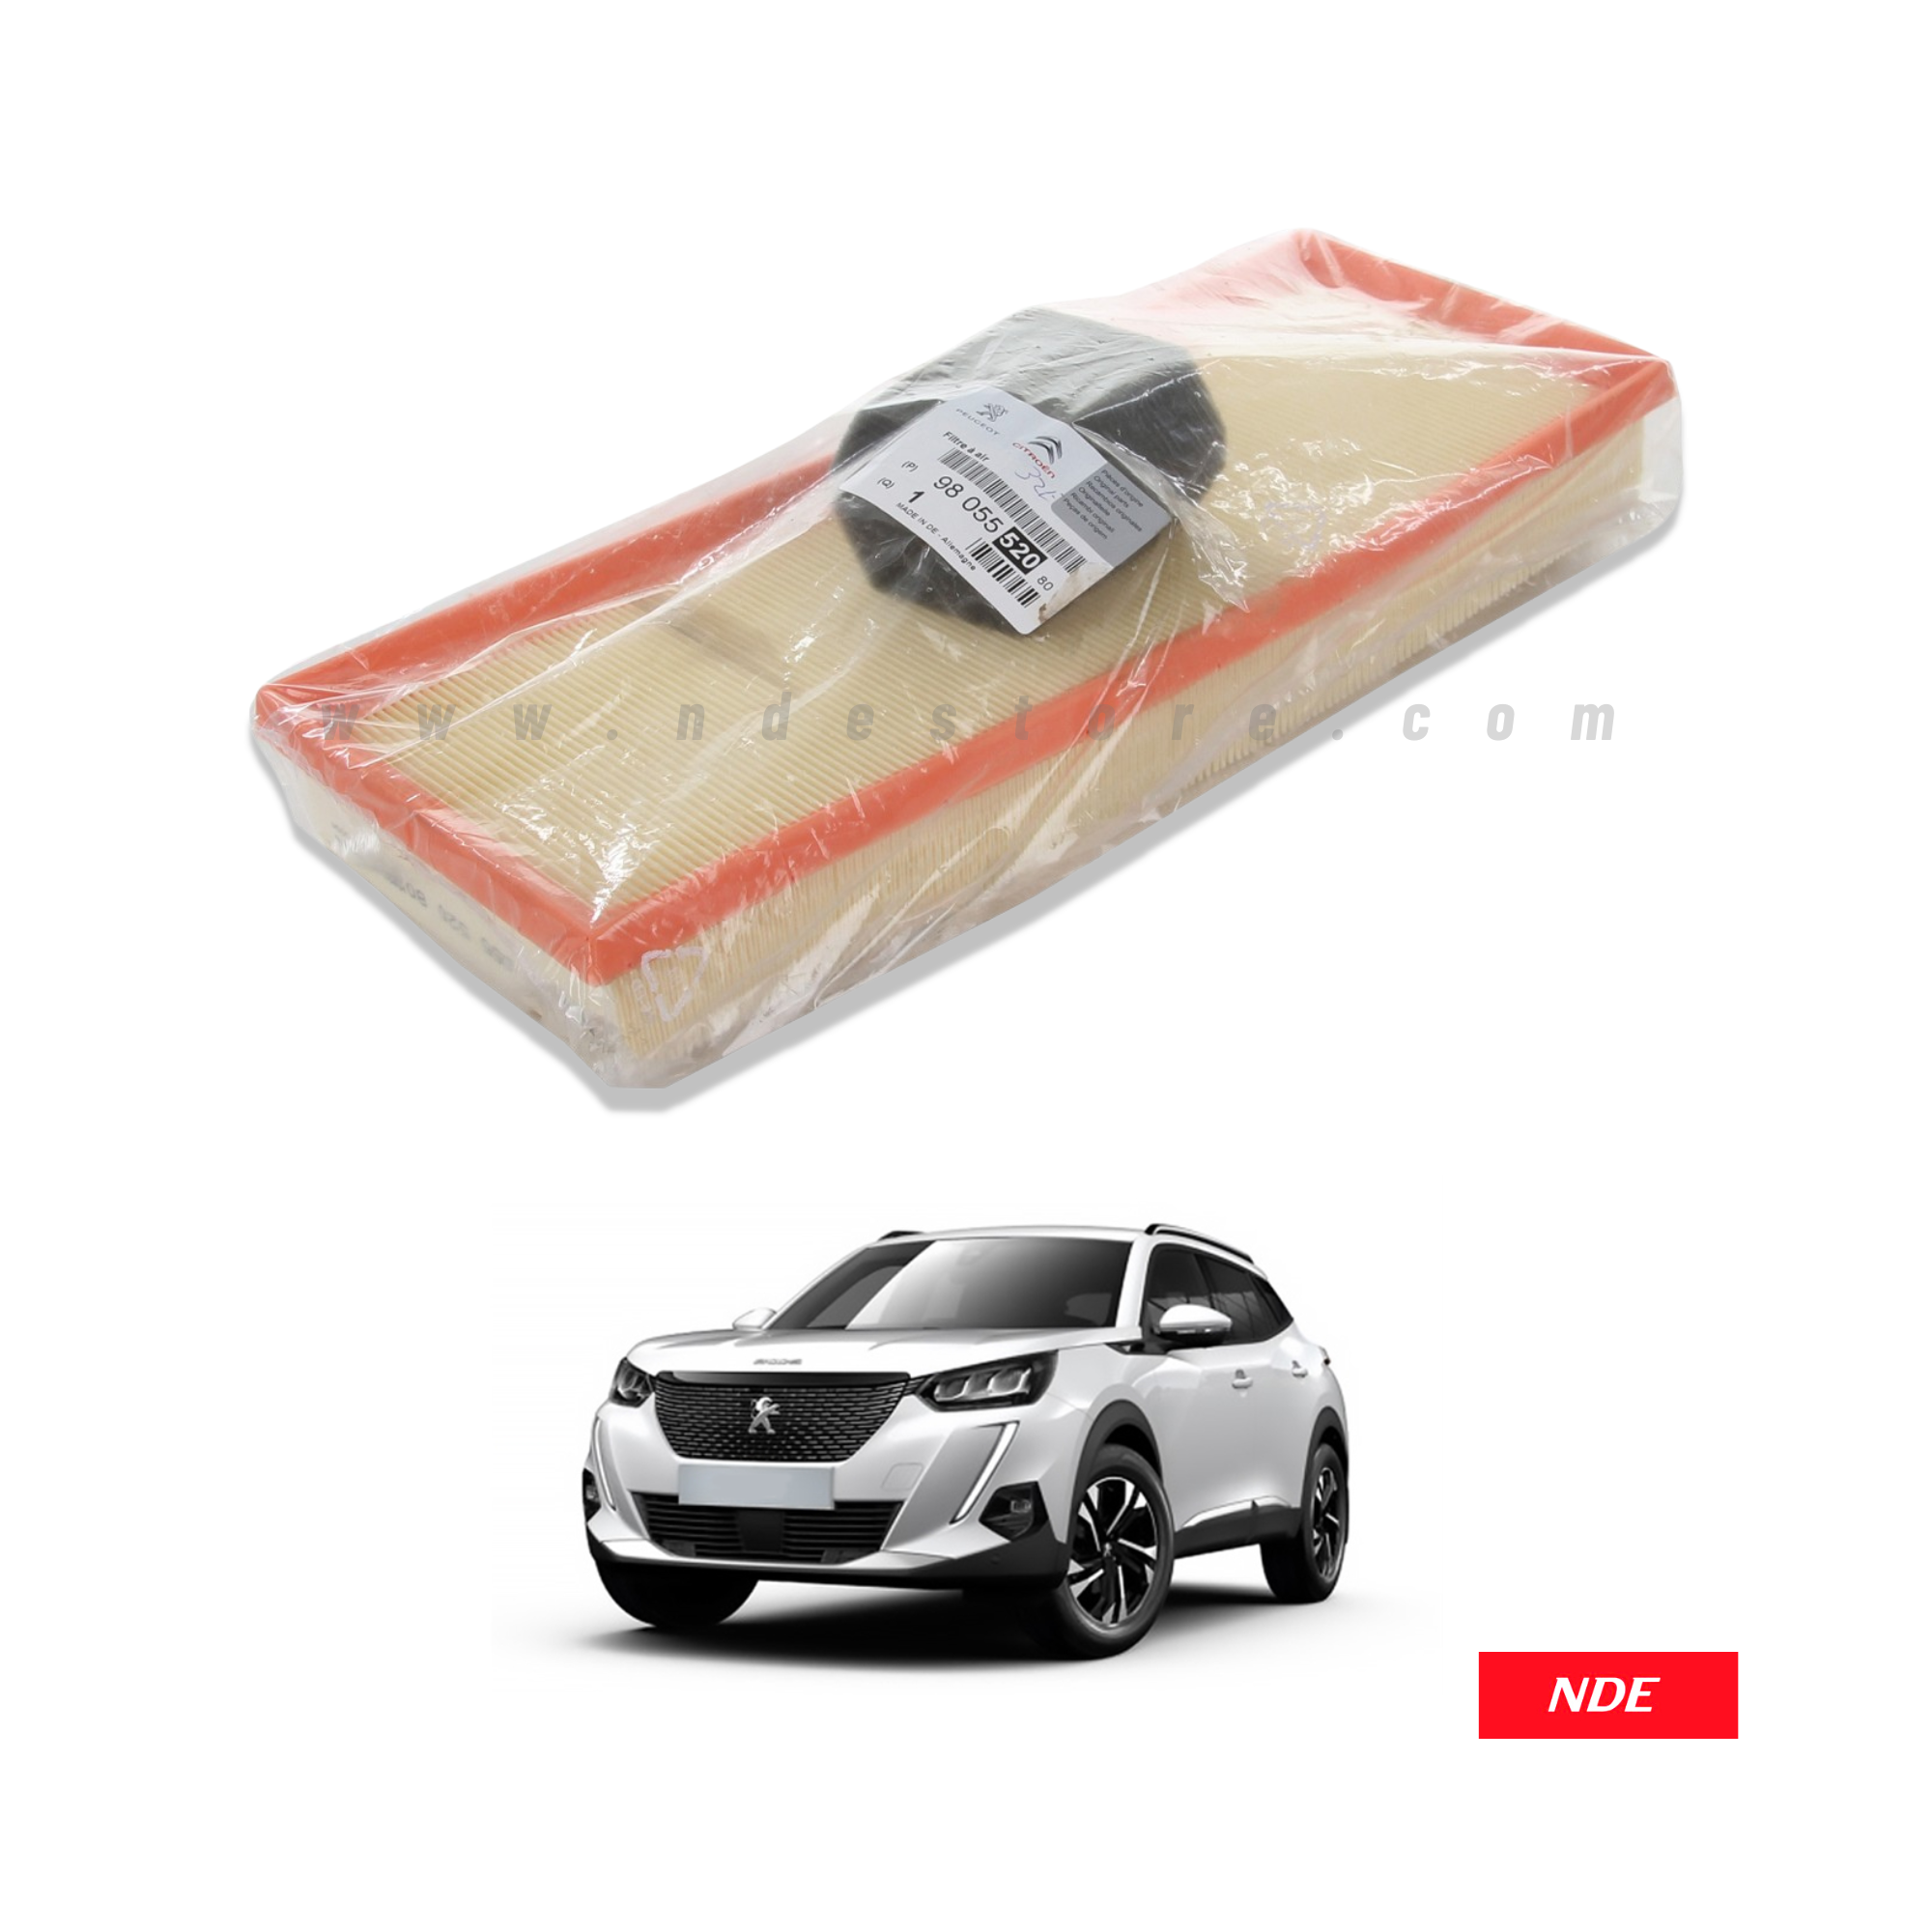 Peugeot spare parts, accessories, tuning and carpets Peugeot 2008